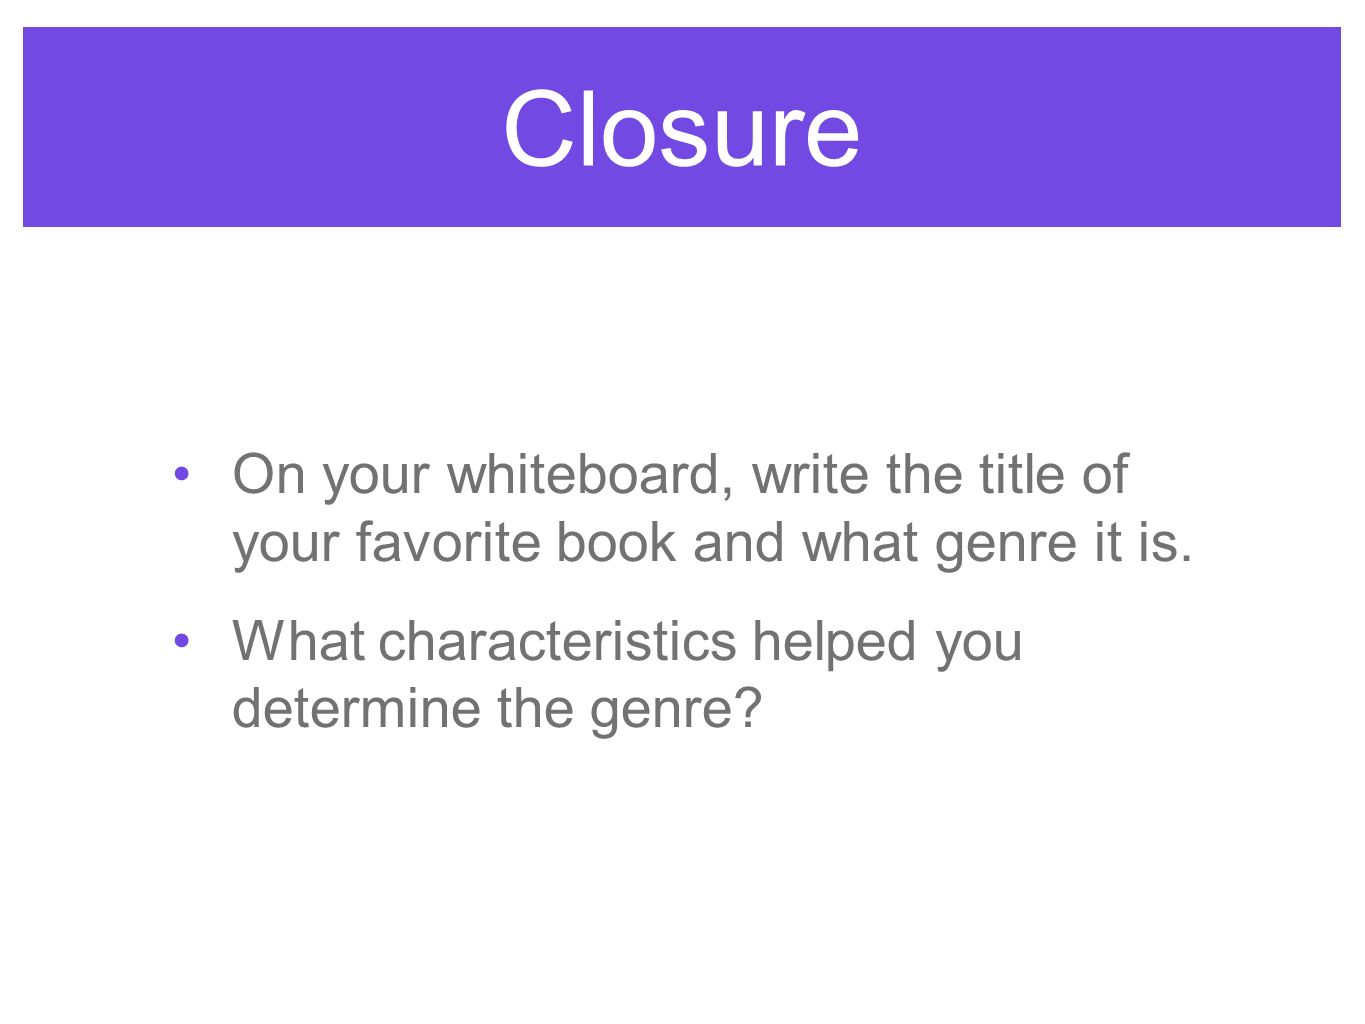 Closure On your whiteboard, write the title of your favorite book and what genre it is.